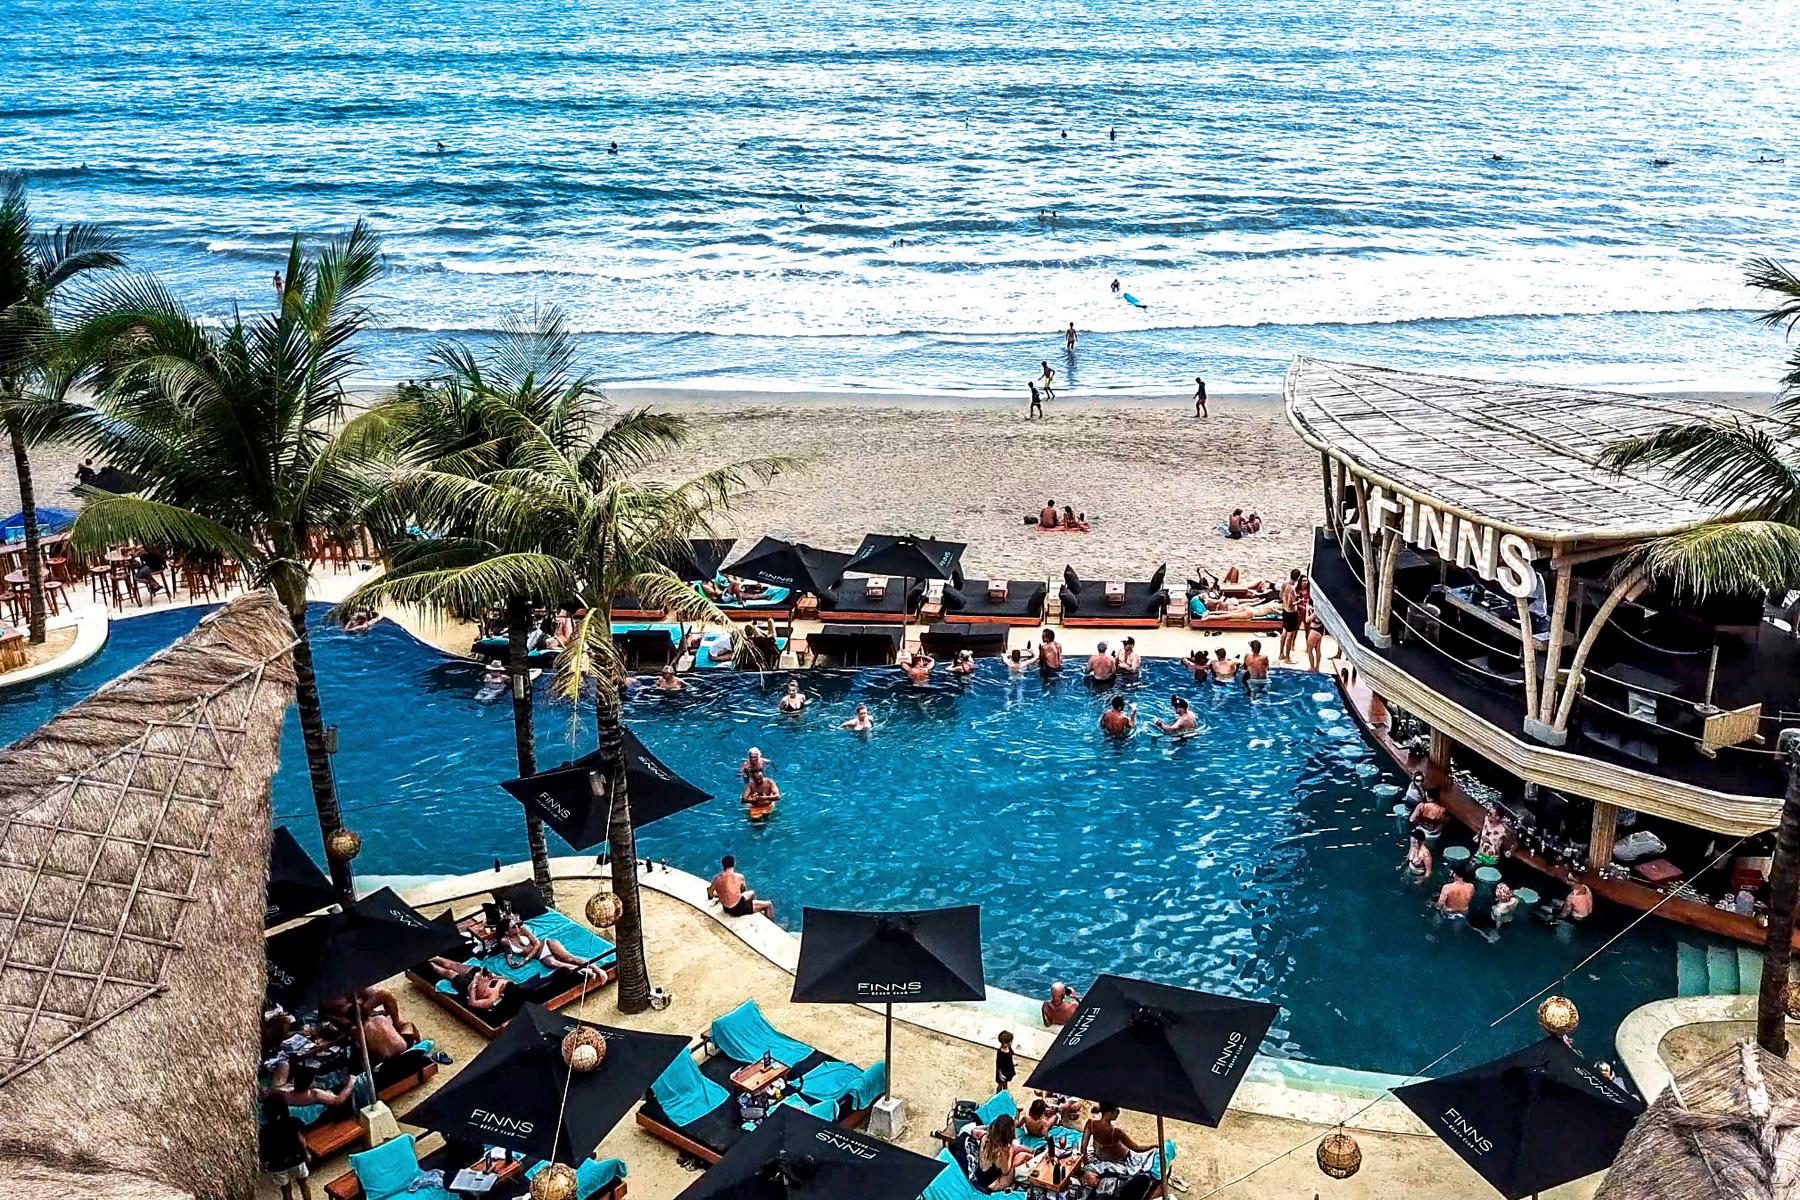 Bali's Best Beach Clubs for Sun, Swimming, and Food and Beverages